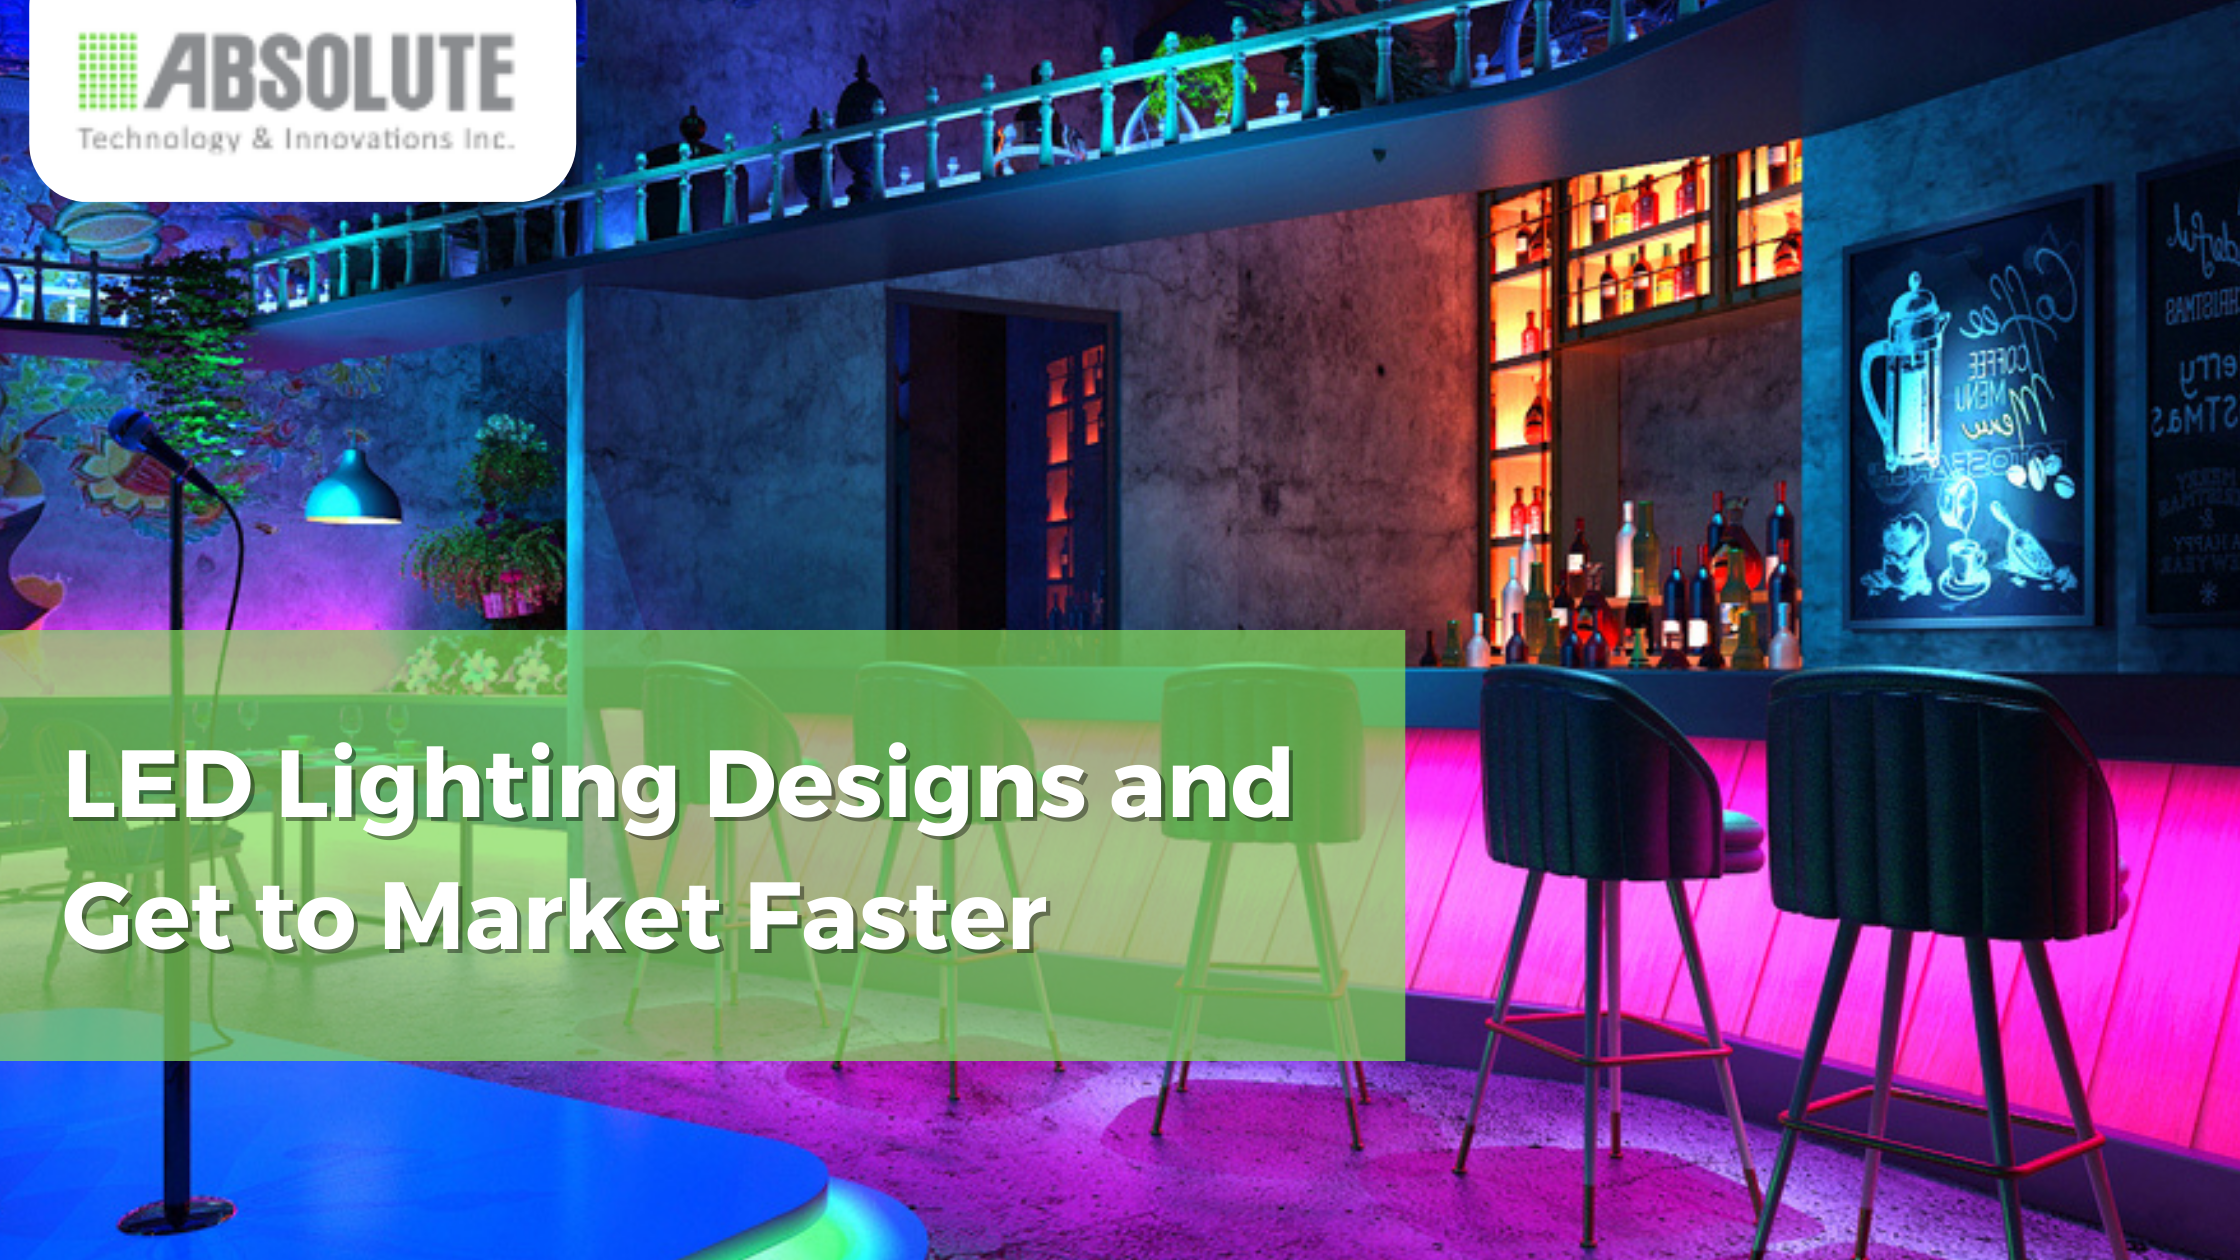 LED Lighting Designs and Get to Market Faster